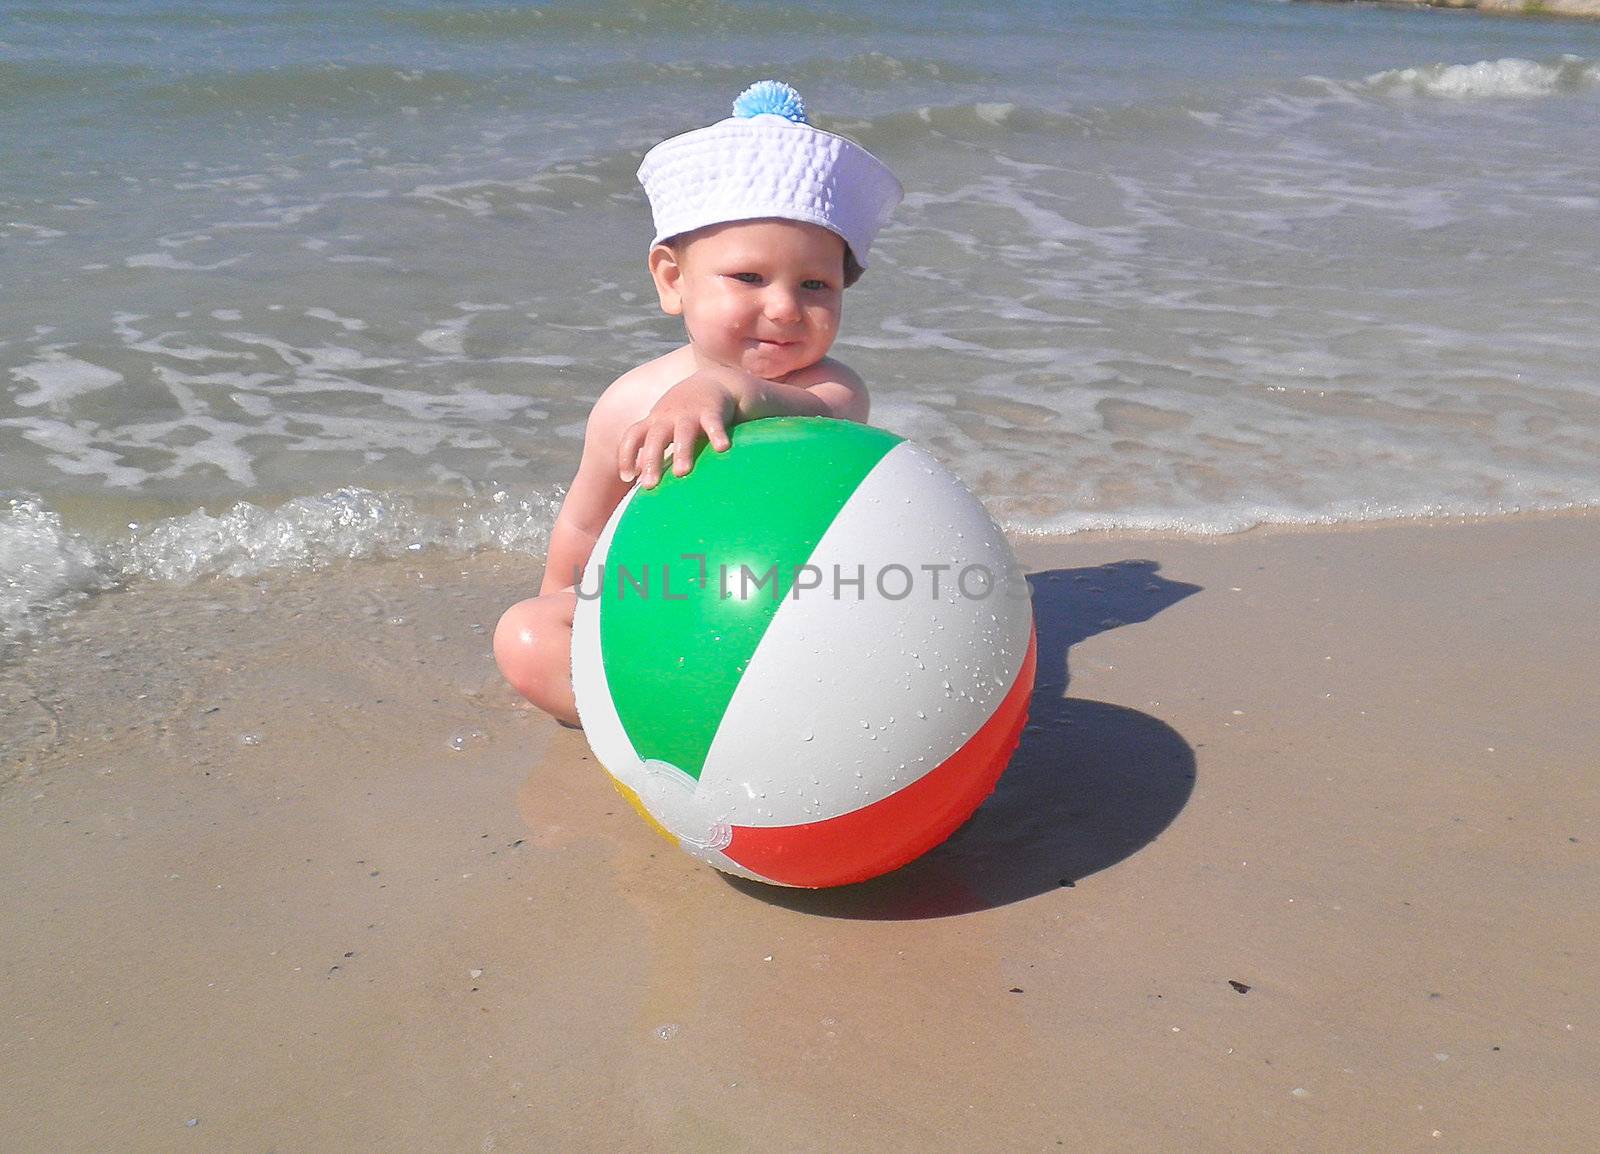 The kid with the ball on the beach by NickNick